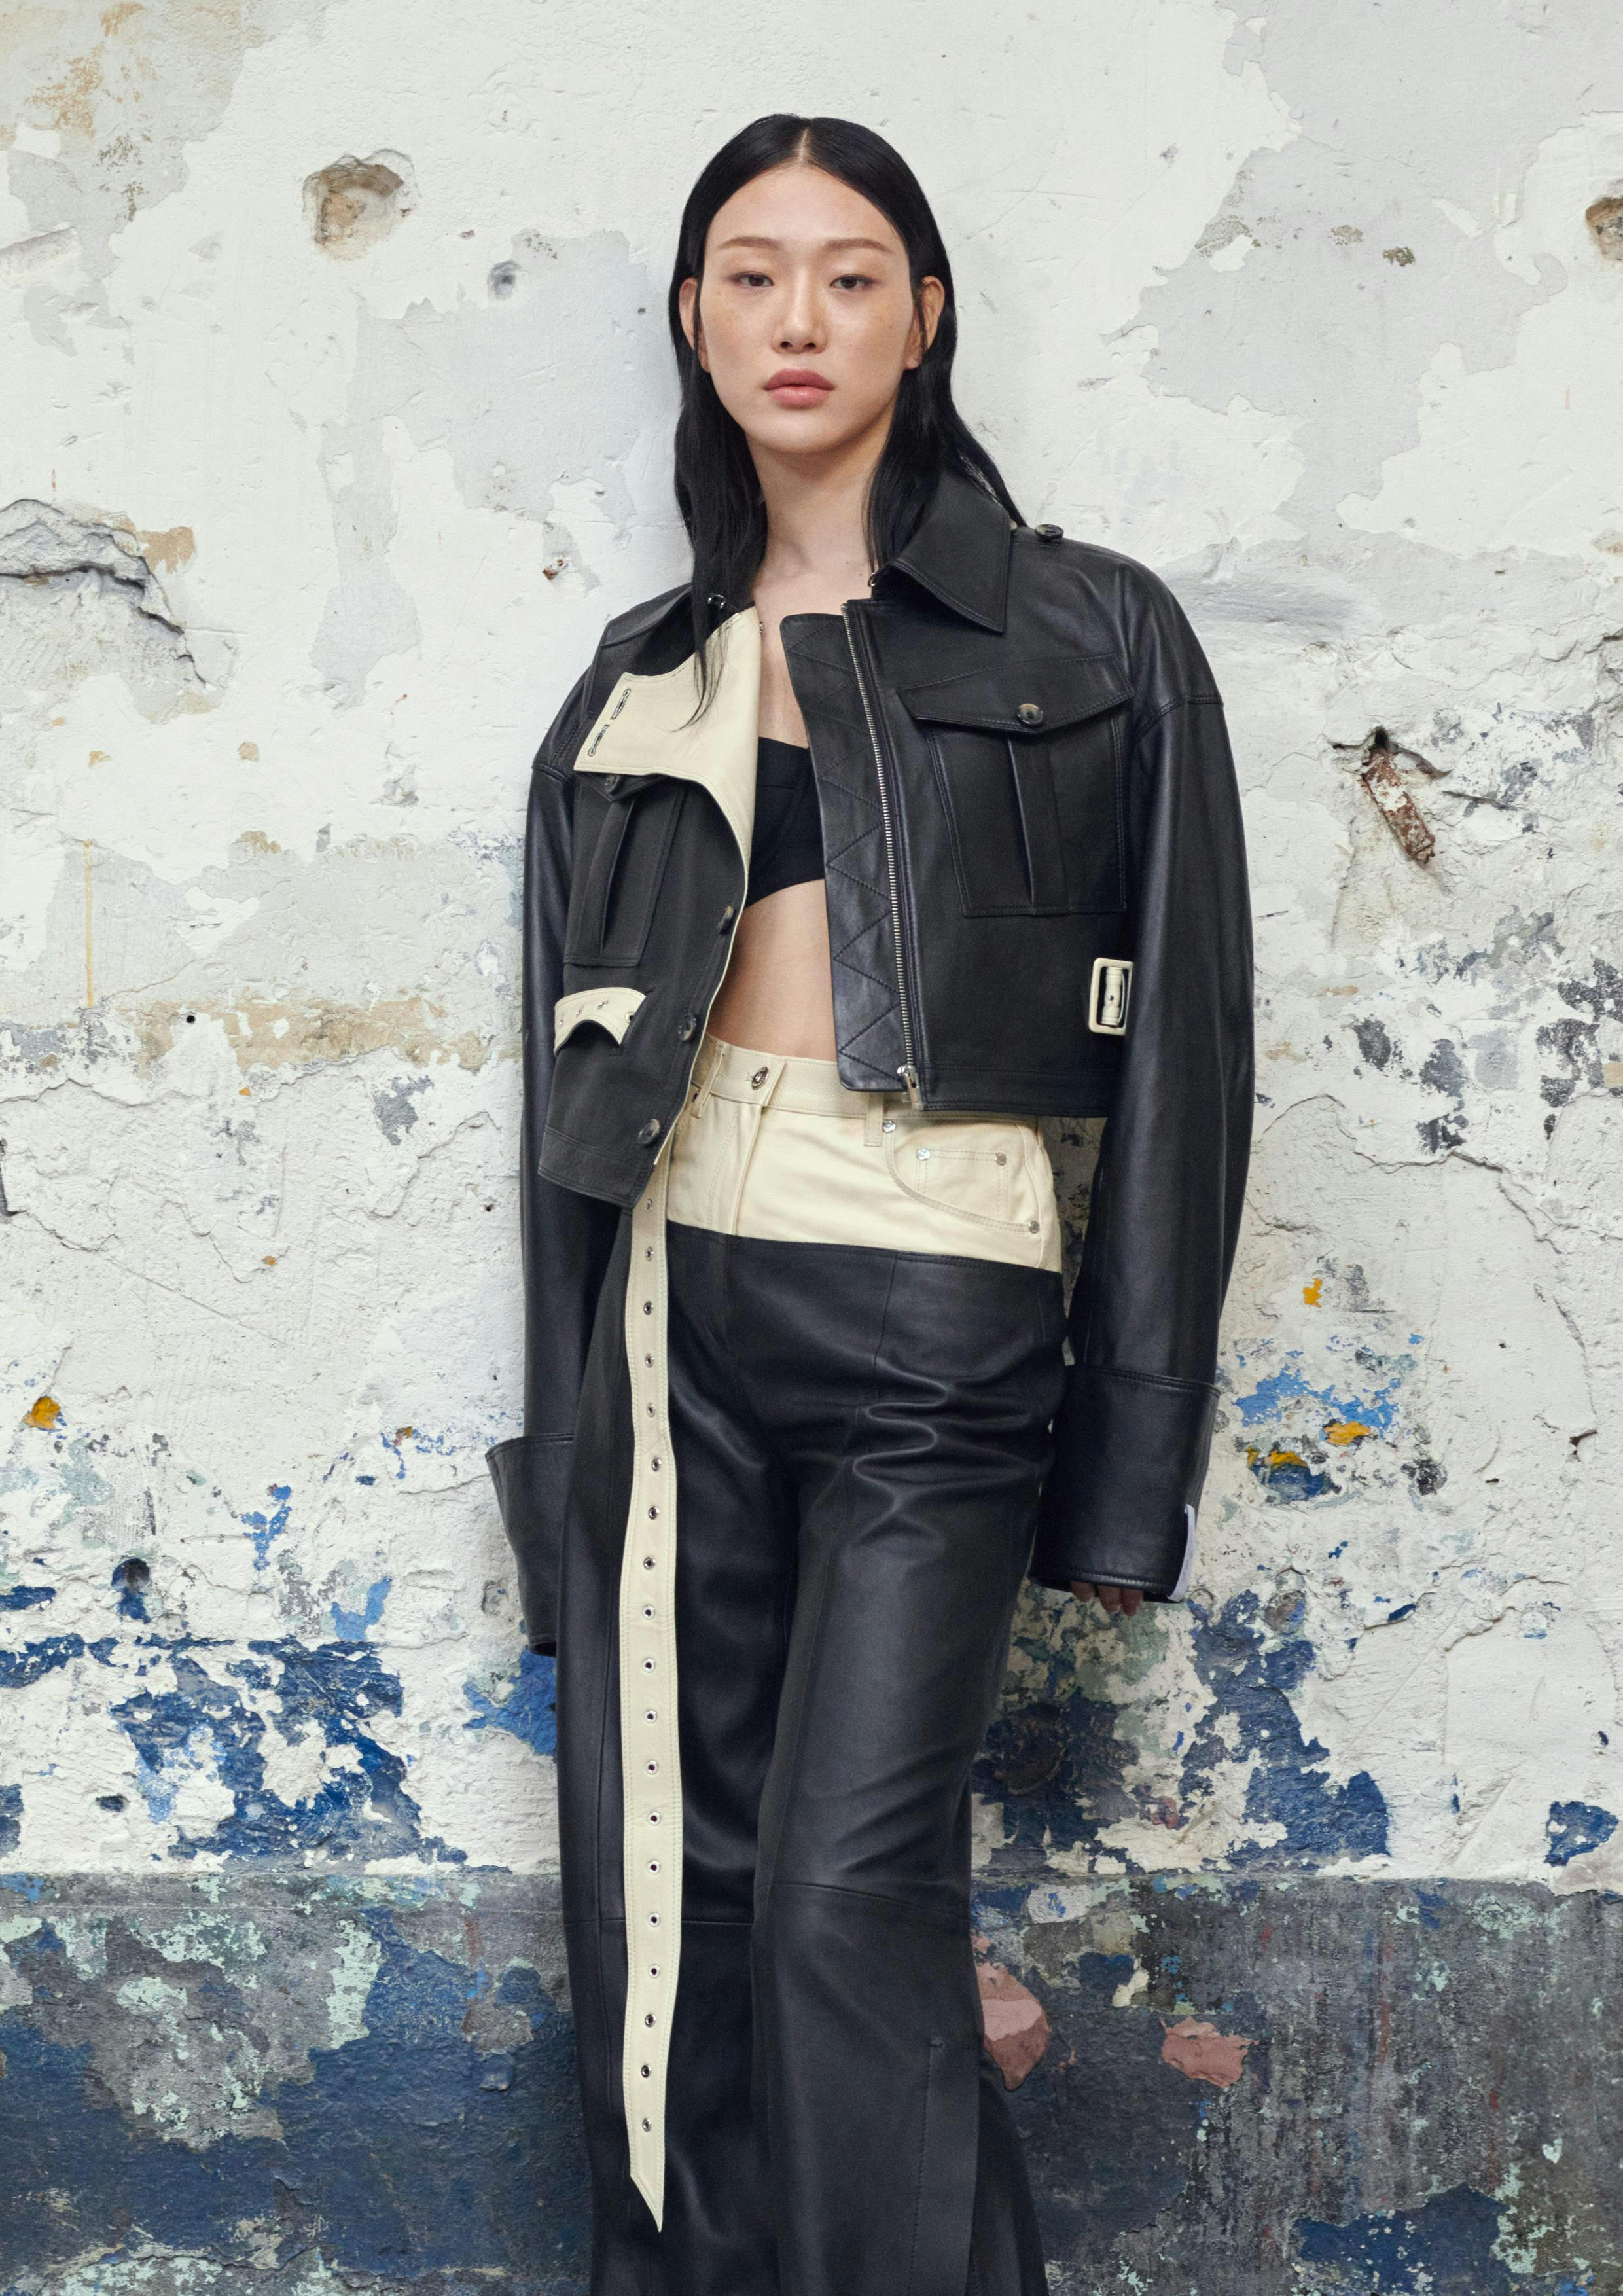 h&m x rokh collaboration: a woman wearing a black leather jacket and pants